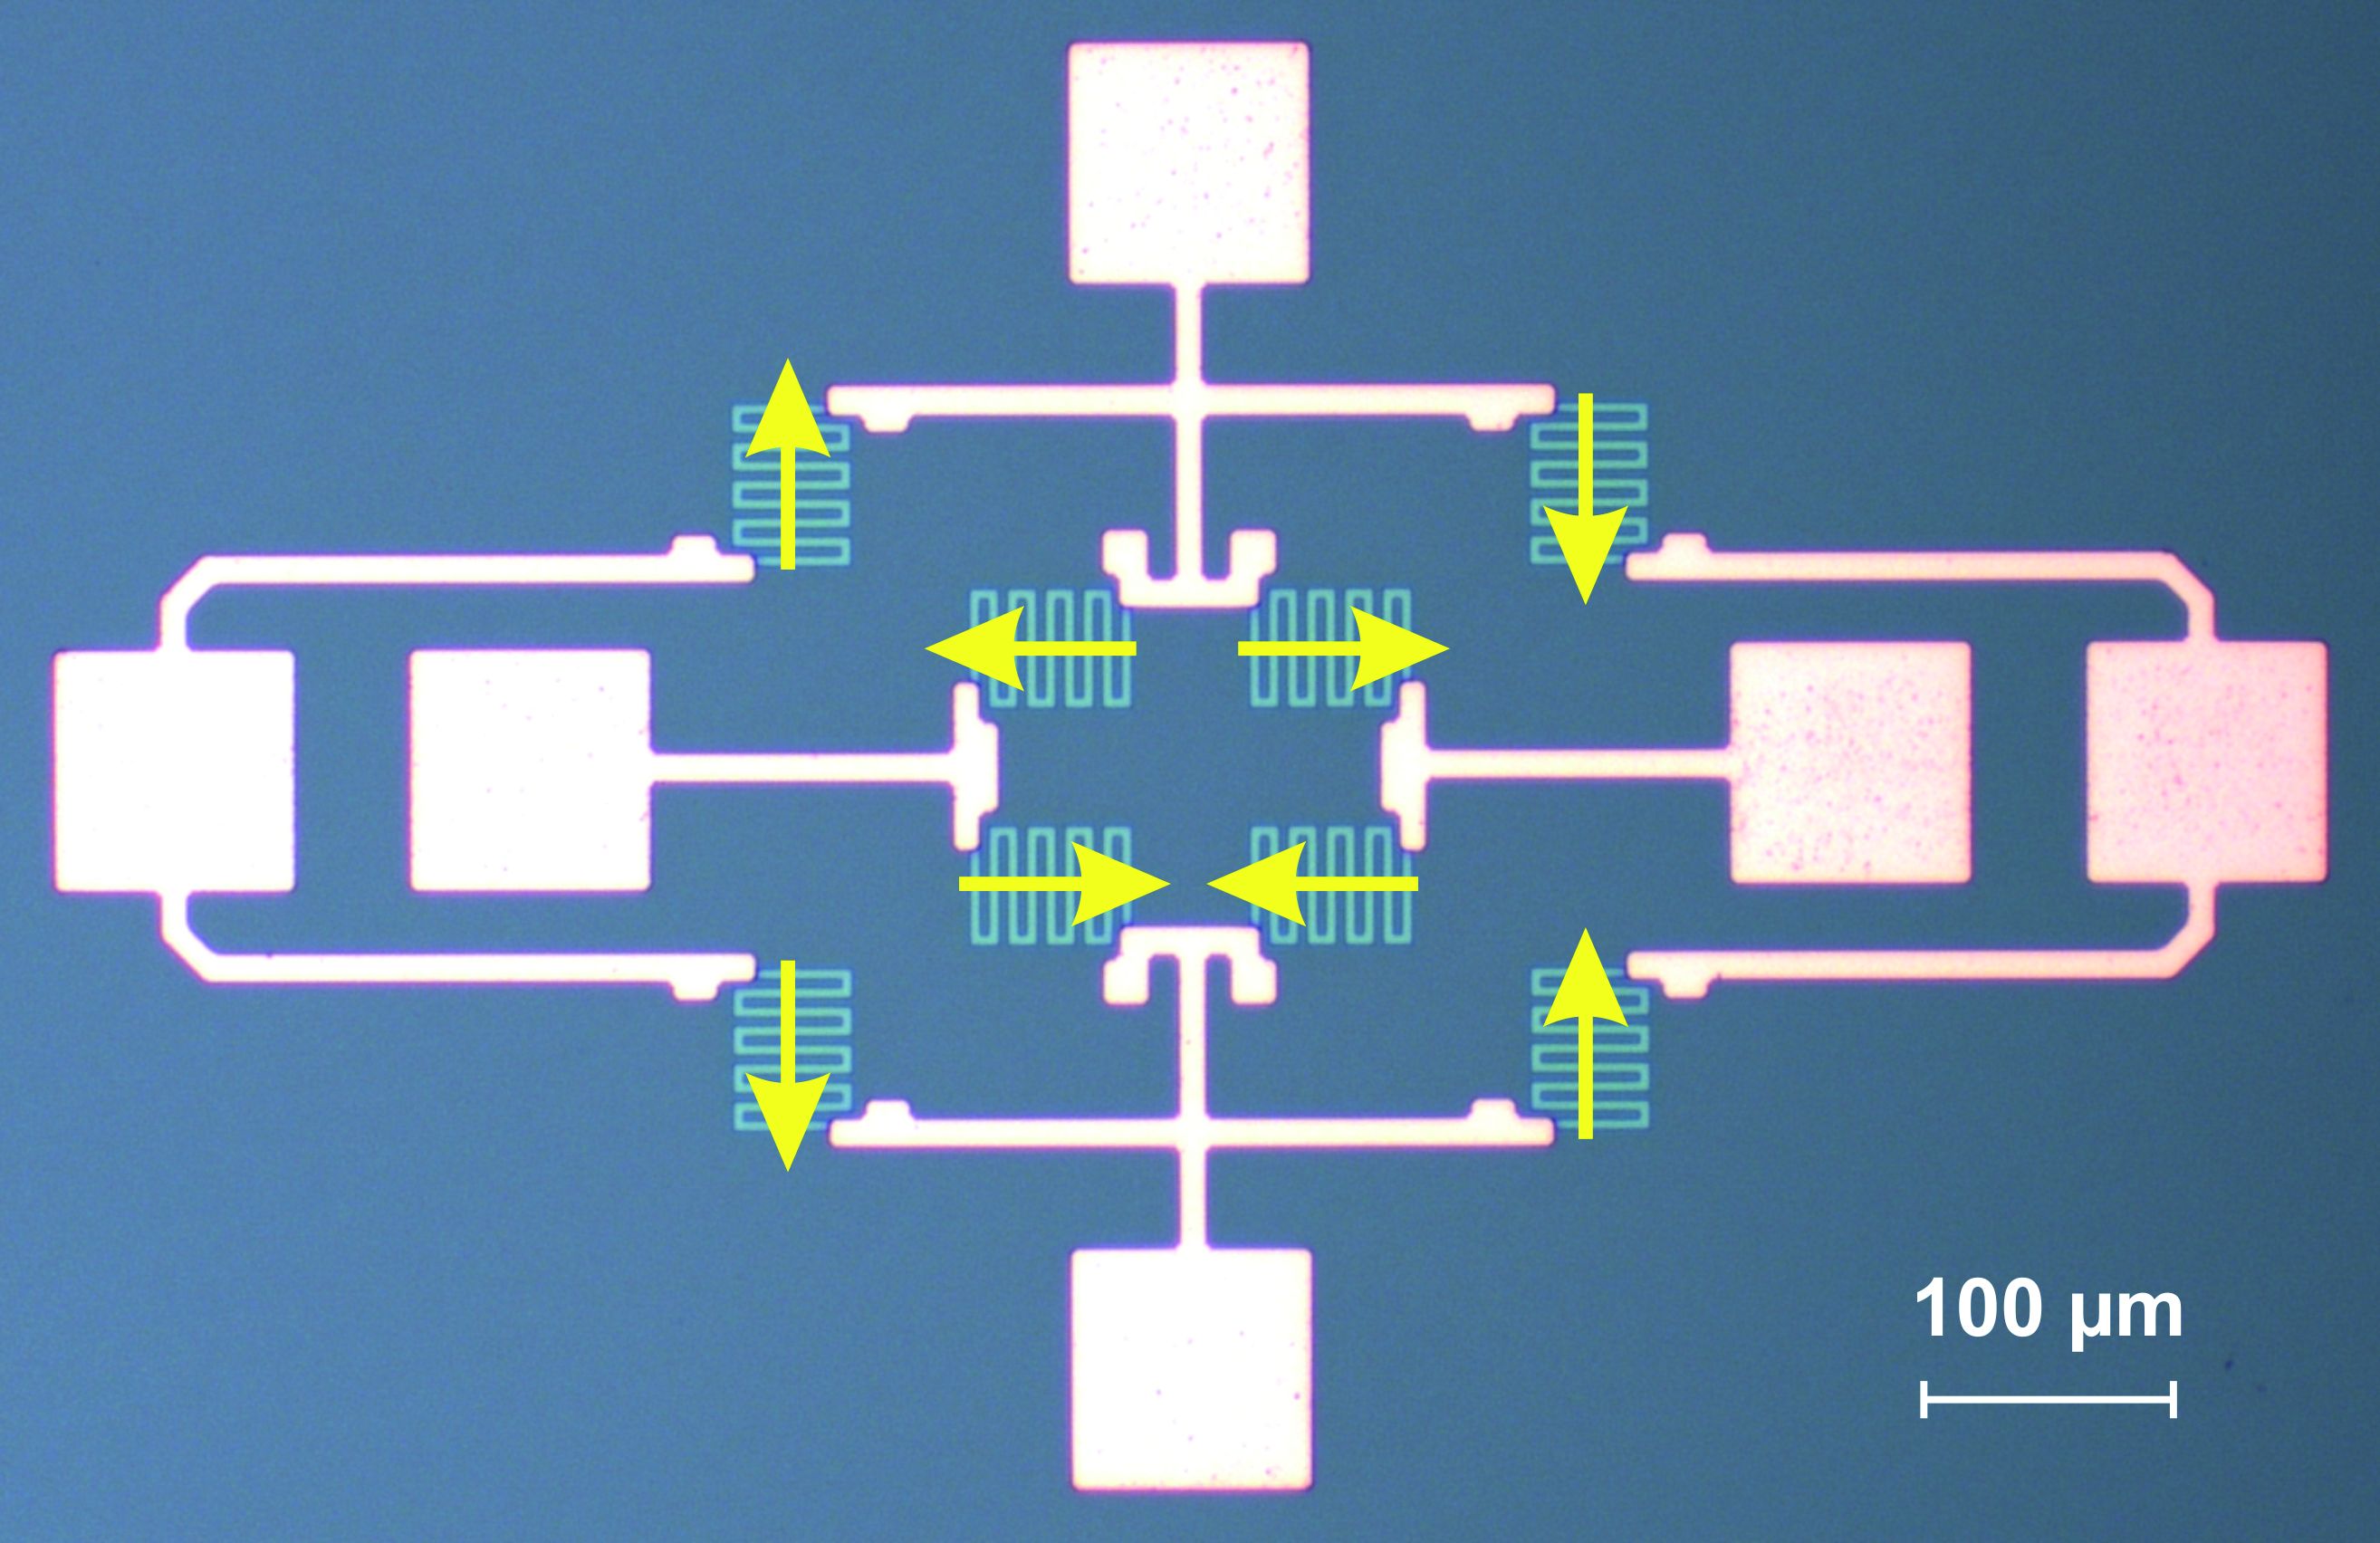 Microscopic image of the focused double full bridge 2D GMR spin valve sensor in monolithic integration. The yellow arrows illustrate the locally set magnetization of the pinned layers